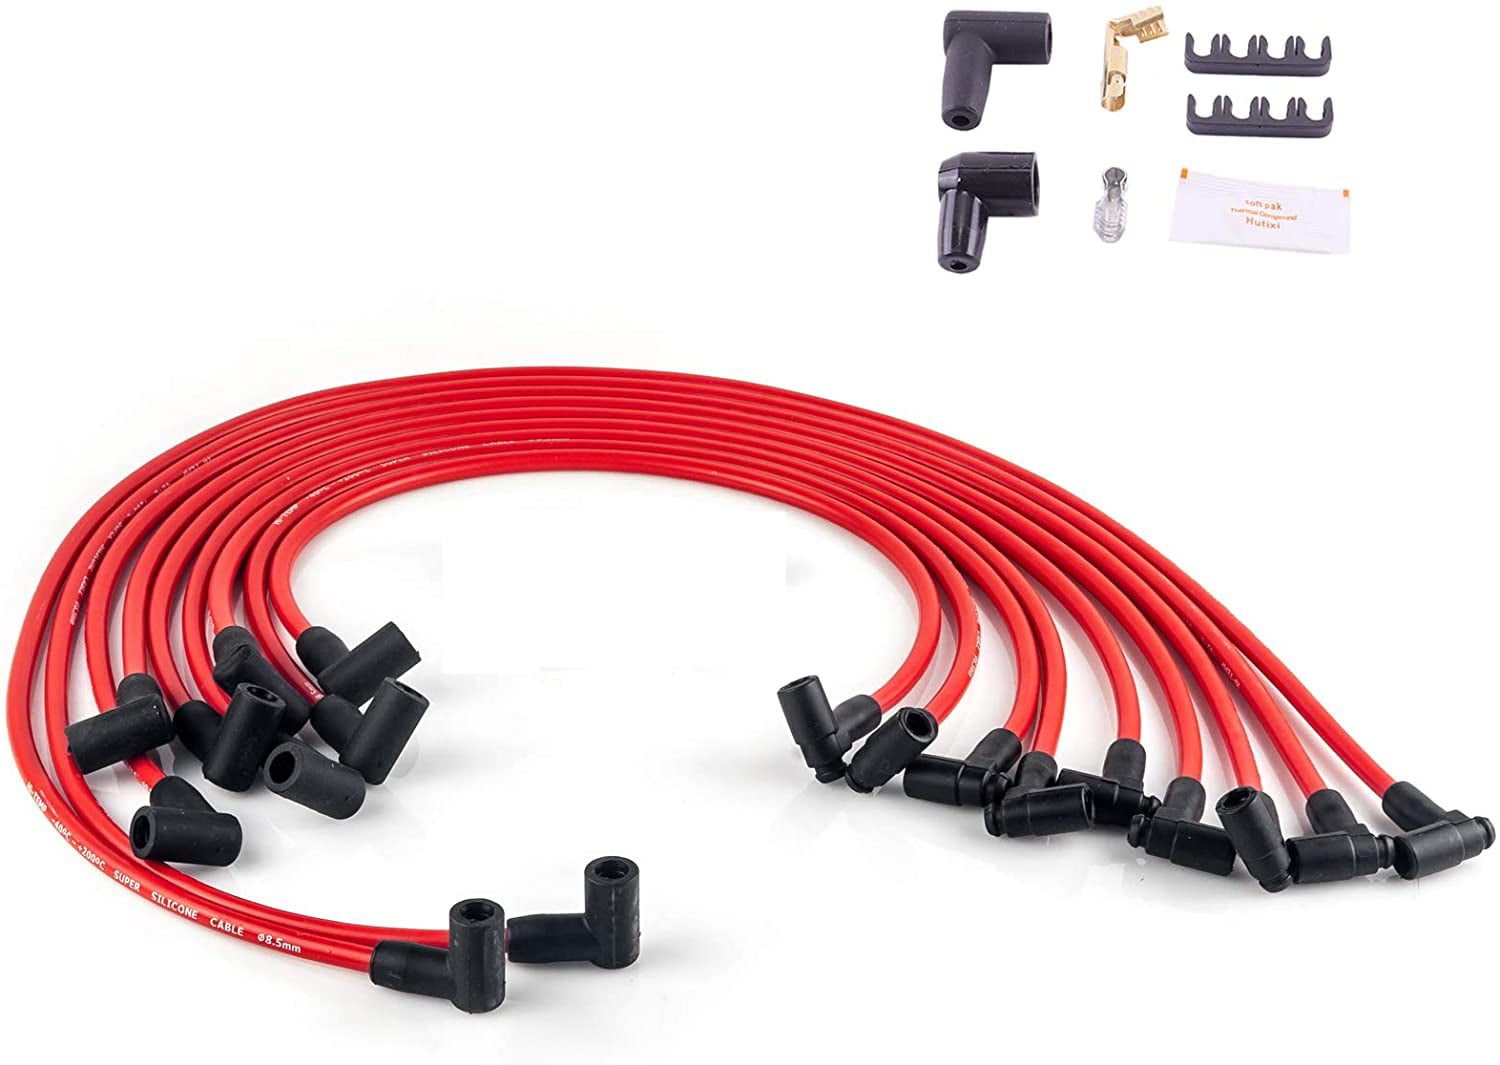 MAS HEI Distributor & Spark Plug Wires & FREE 170072 HEI Distributor Battery and Tachometer Pigtail Wire Harness Combo Kit Replacement For Chevy Chevrolet GMC SBC 350 400 